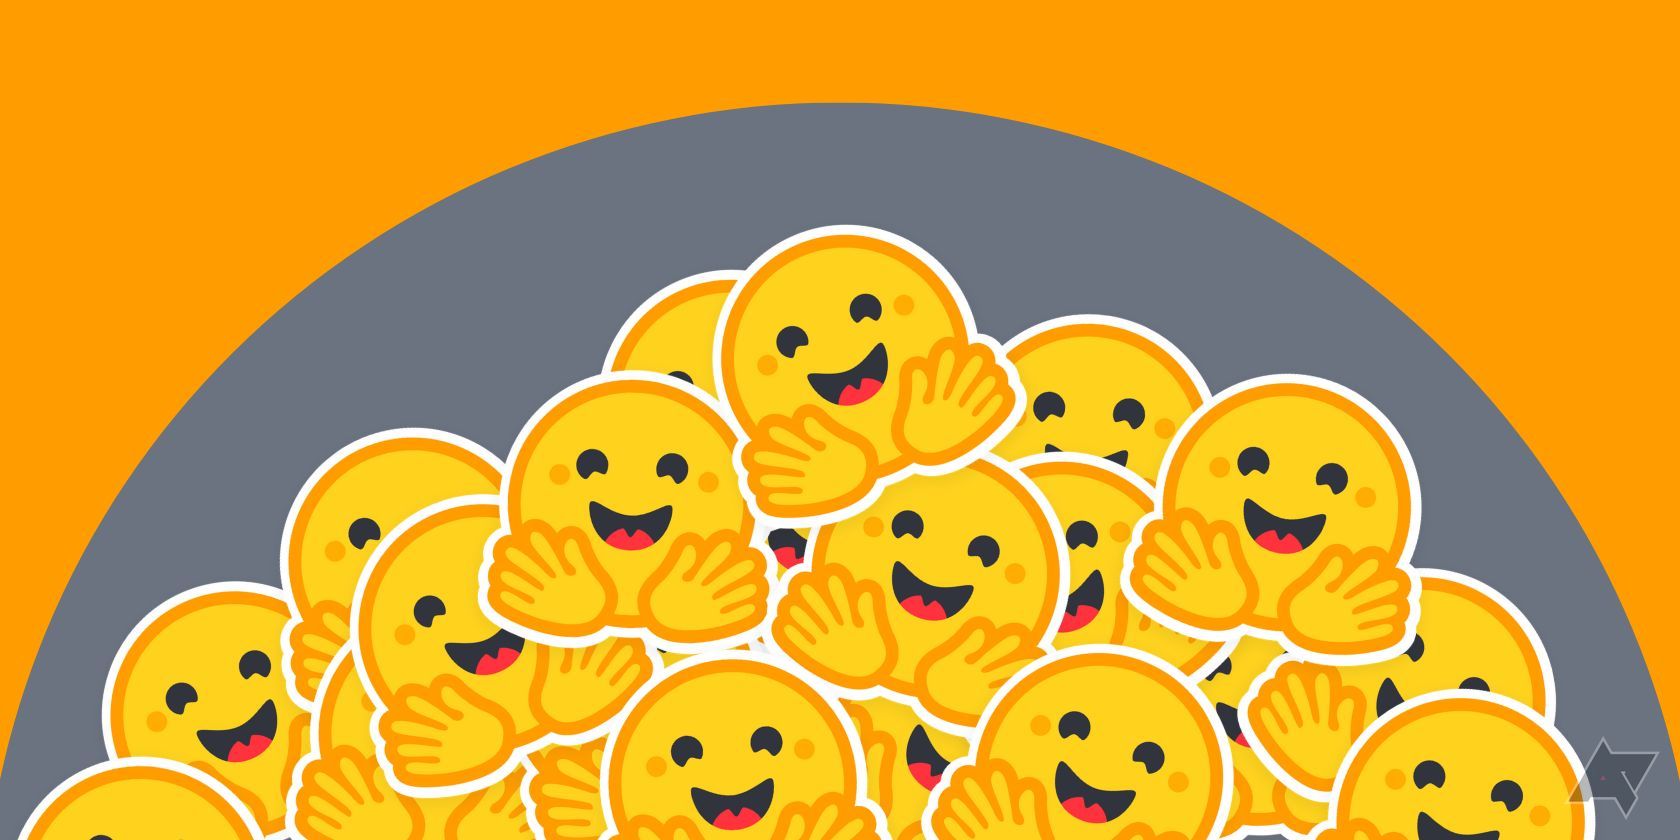 hugging face emojis scattered on a grey circle with an orange background